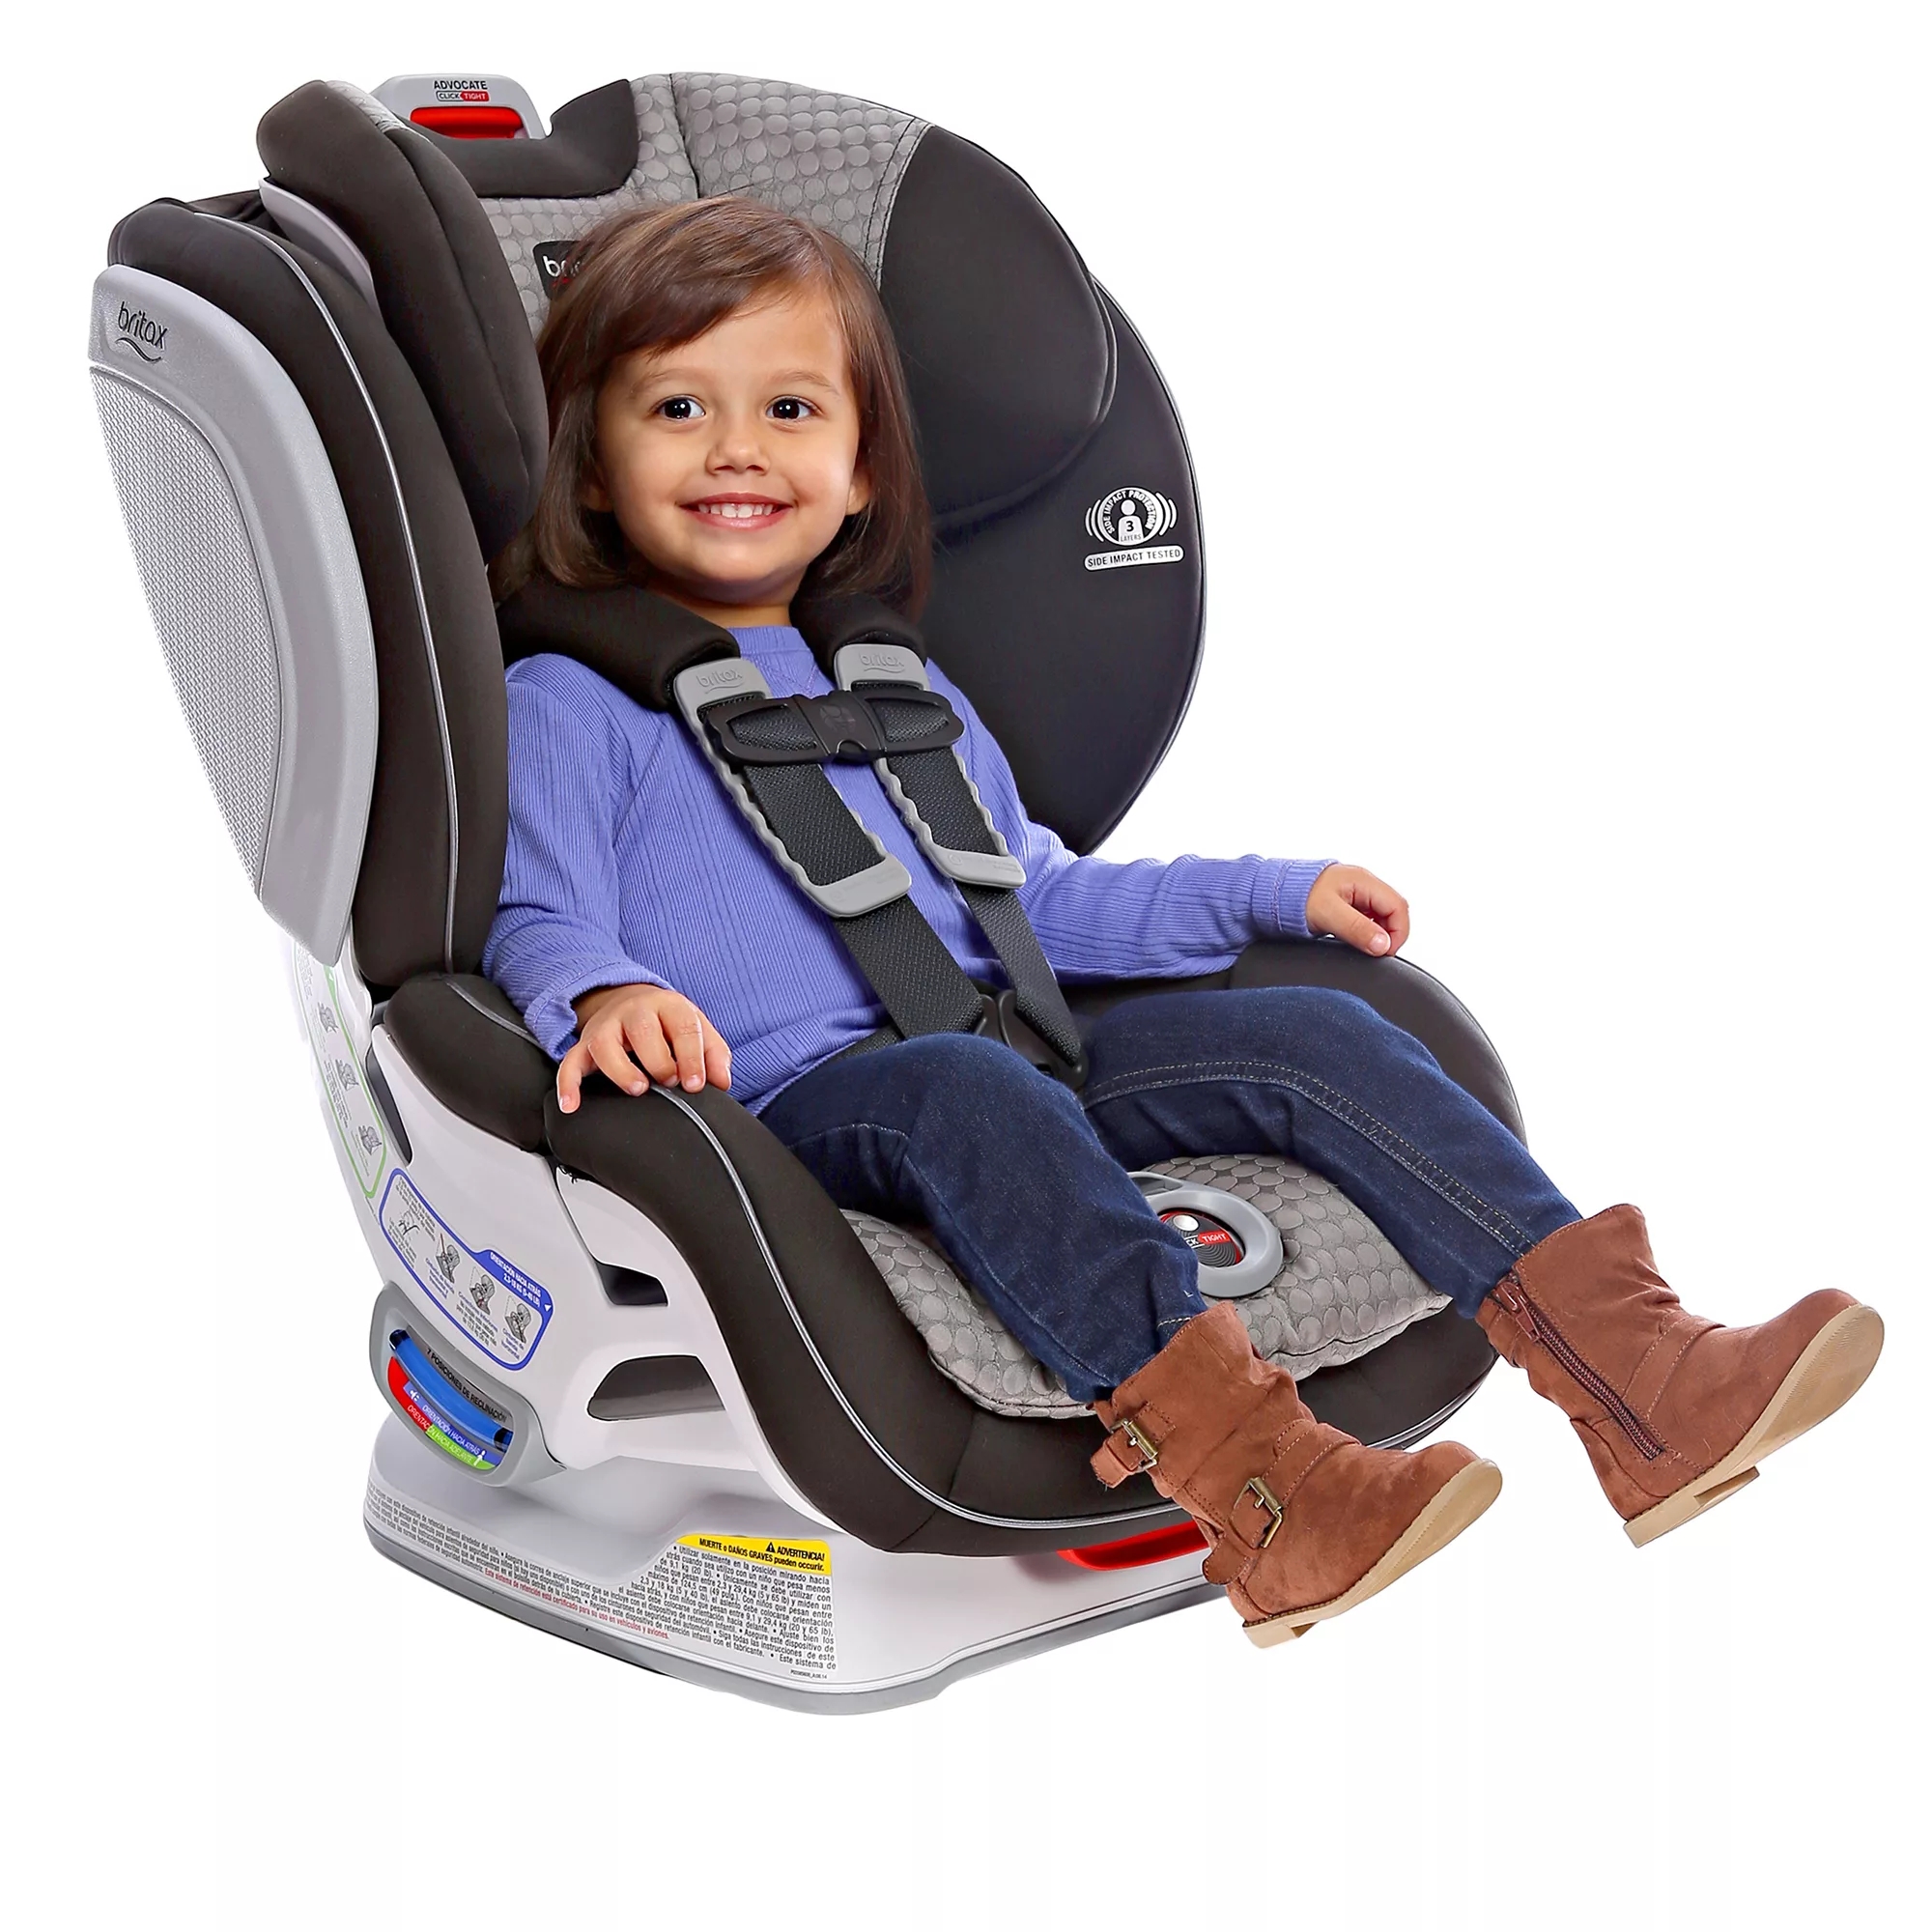 Britax Advocate Clicktight Convertible Car Seat Baby Child Safety 2018 Mosaic 